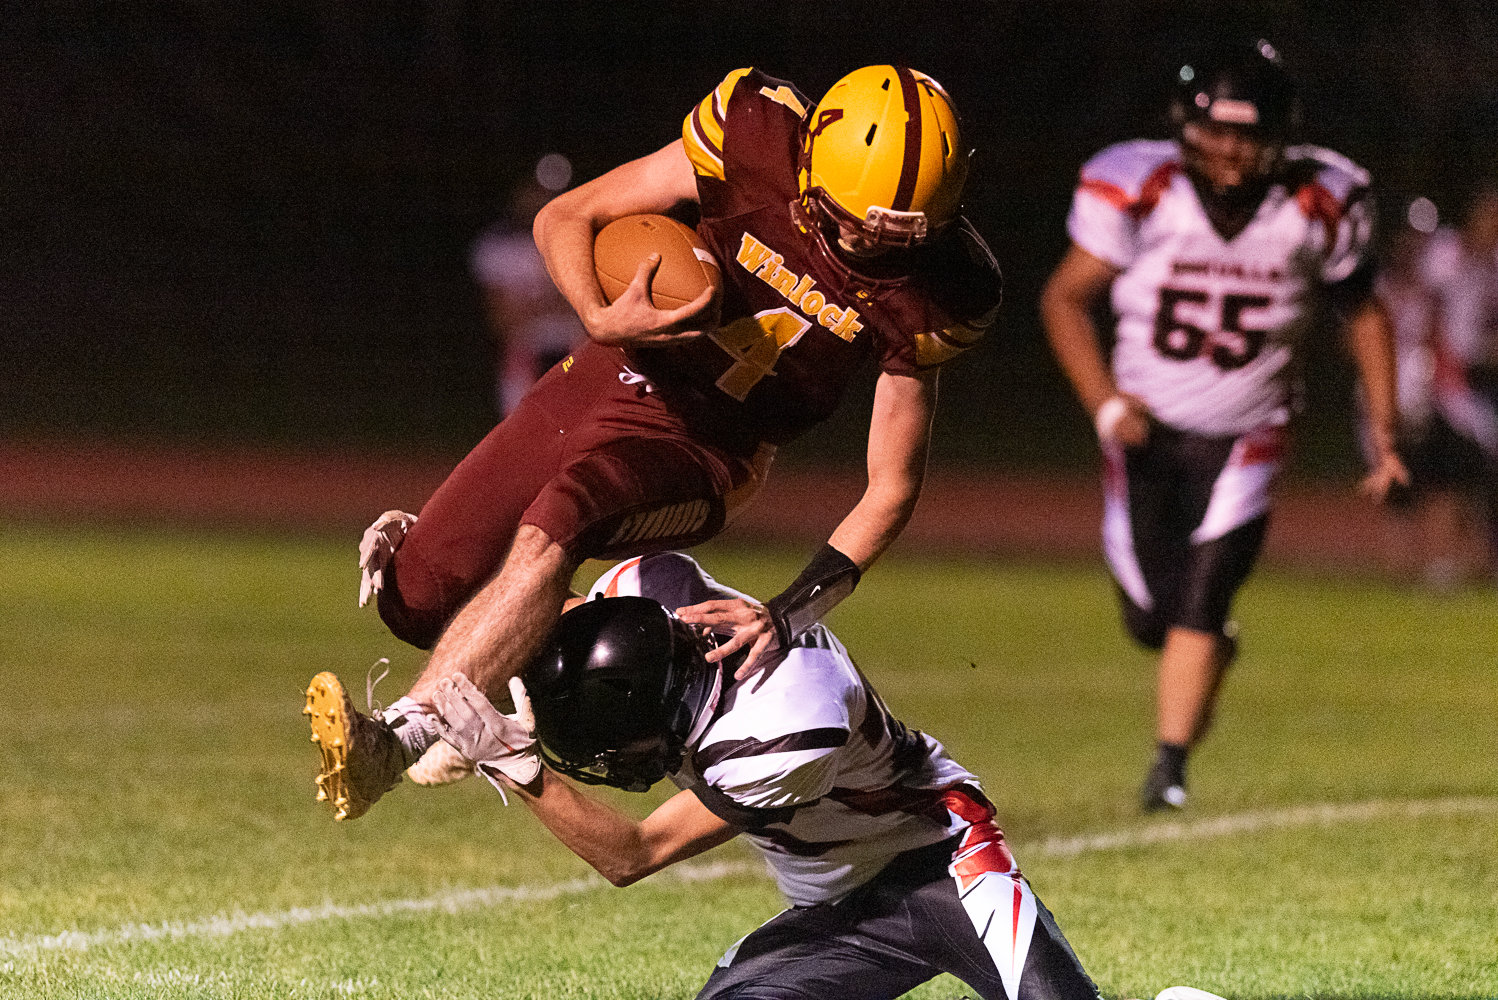 Payton Sickles tries to go high but can't evade Giovanni Rodas during the first half of Winlock's 36-28 win over Oakville on Oct. 7.